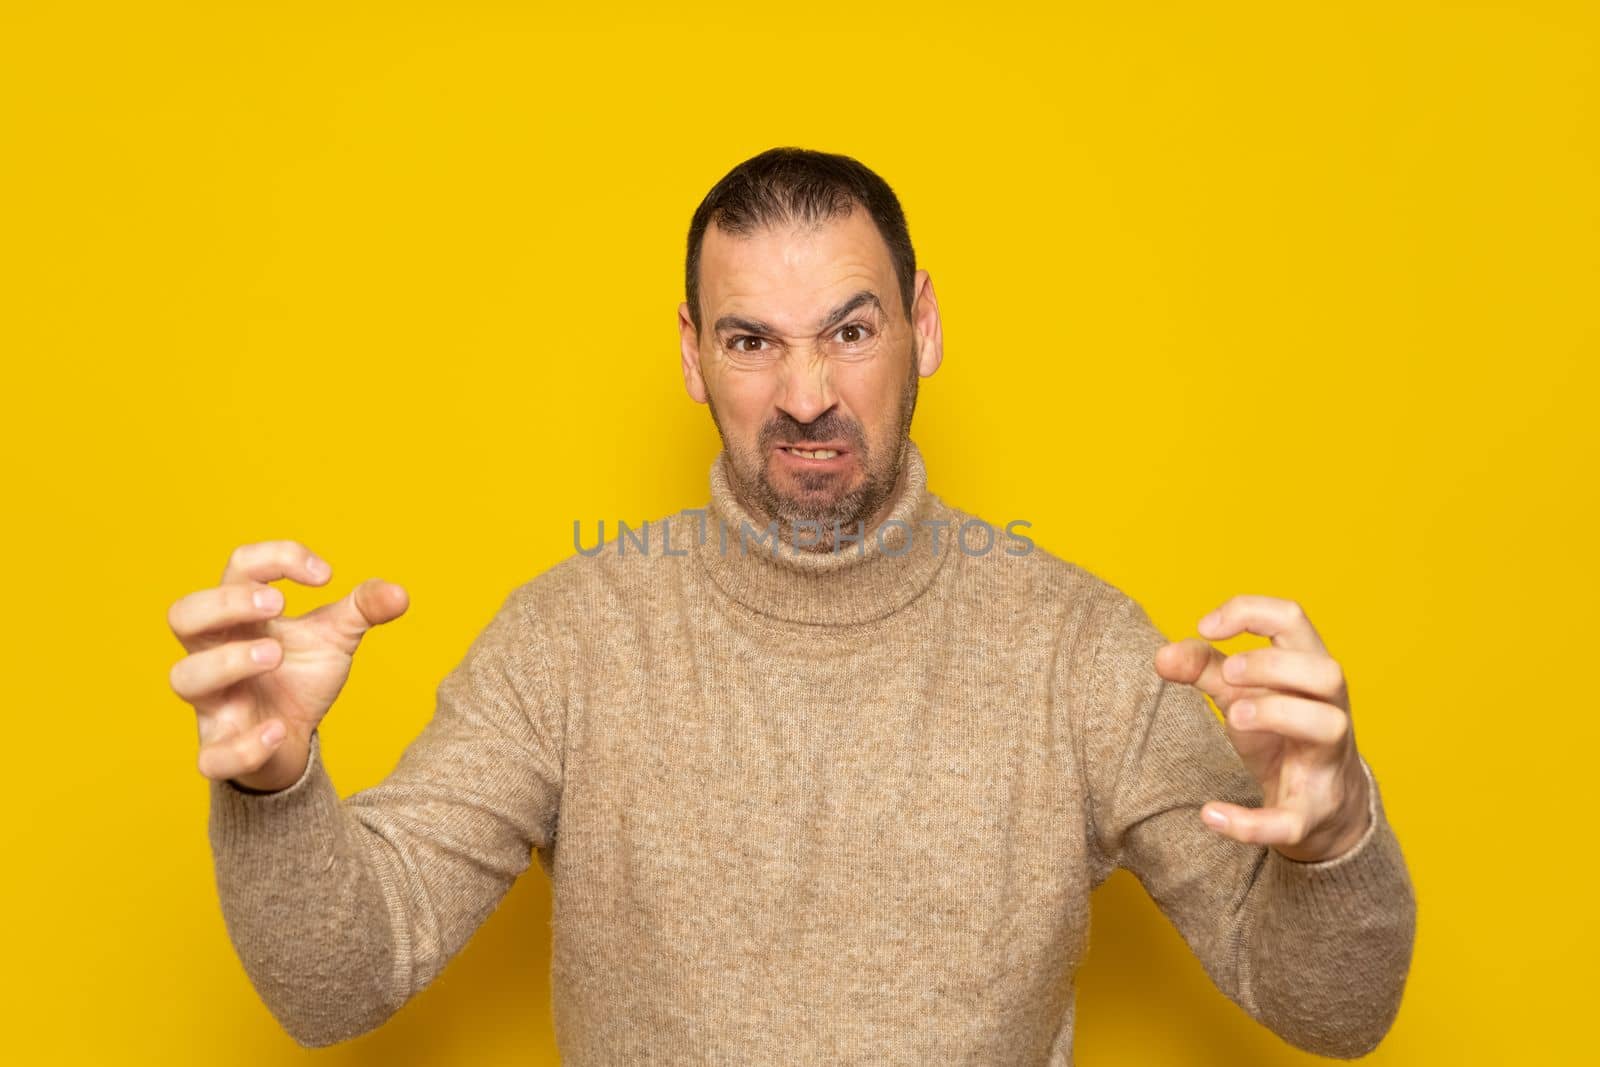 Hispanic man with beard over isolated yellow background in aggressive and furious attitude with raised hands in the shape of claws. Rage and irreverence concept. by Barriolo82